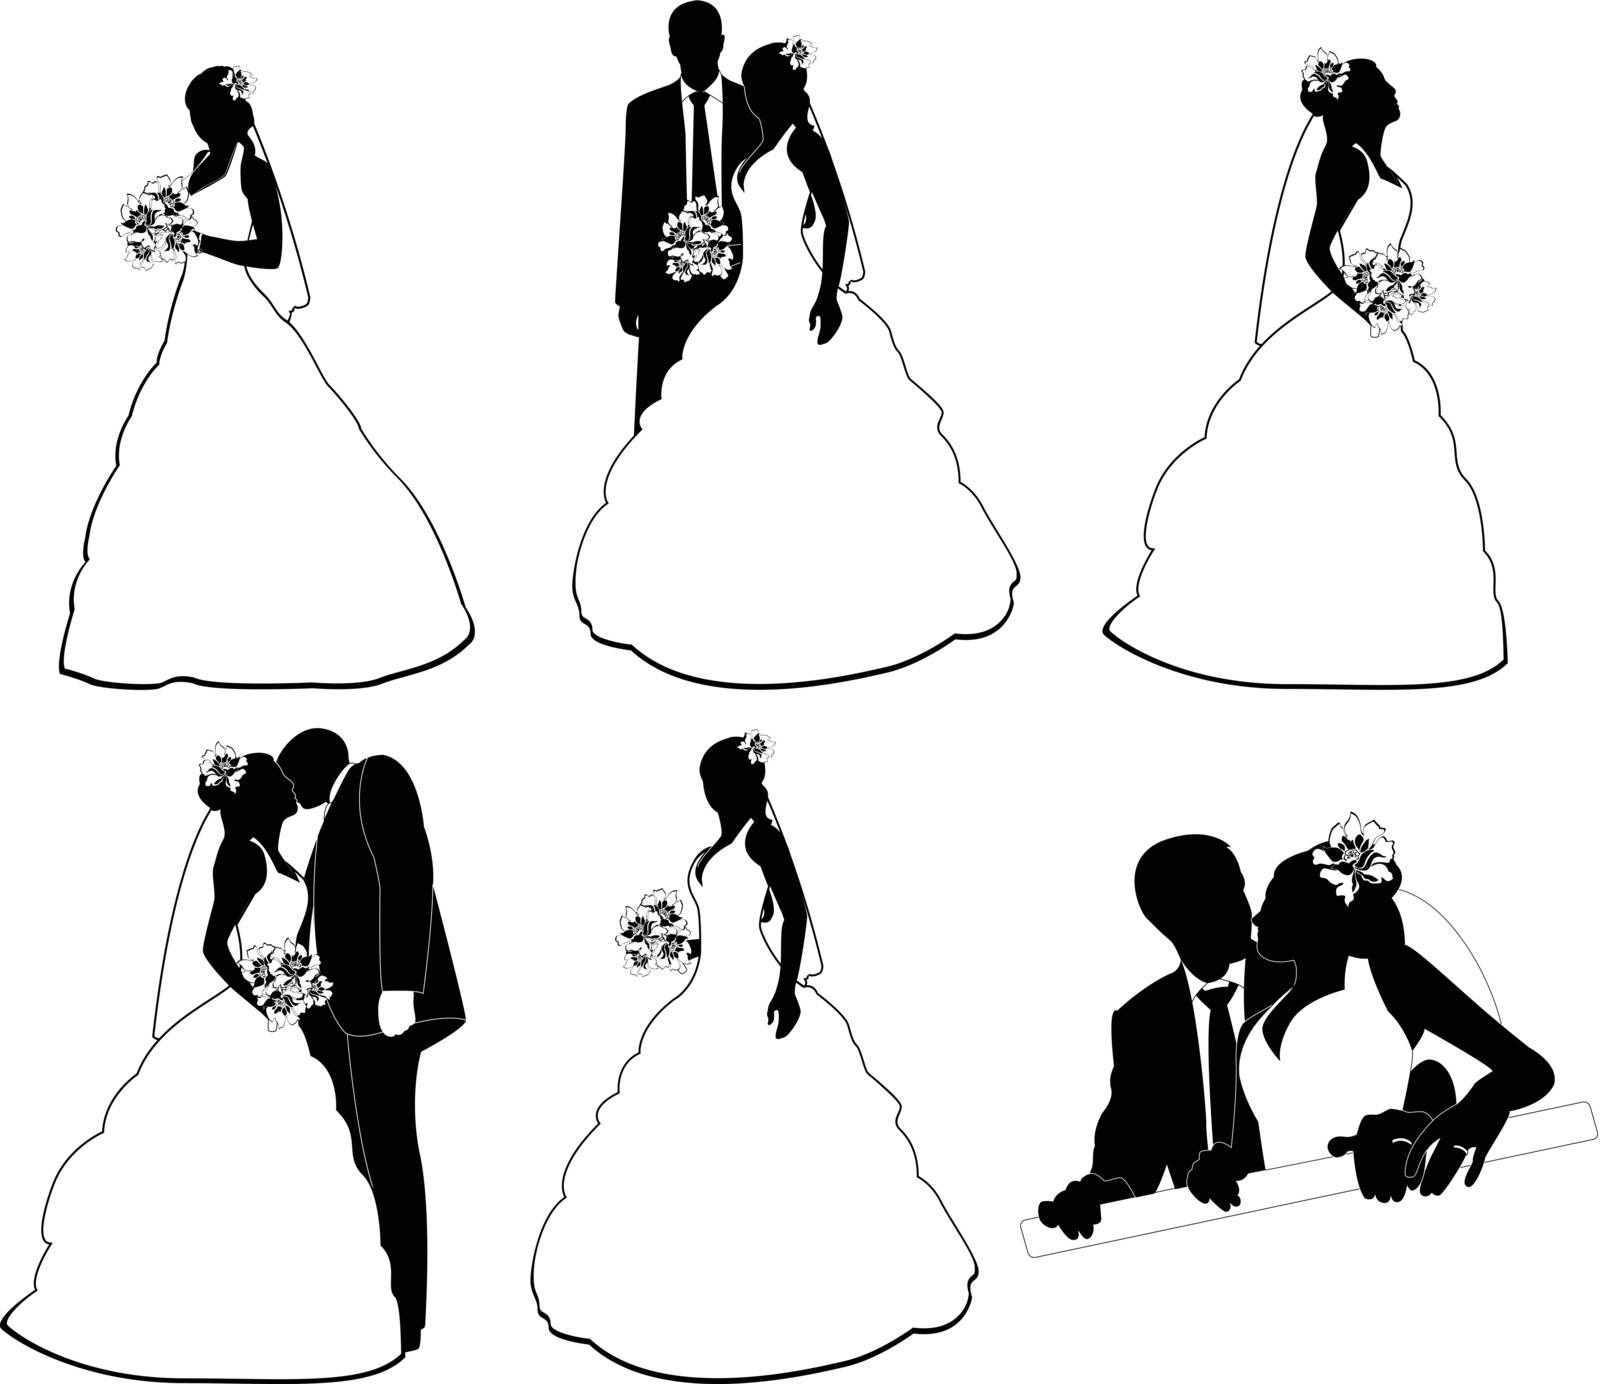 Vector of silhouettes wedding pairs in different situations